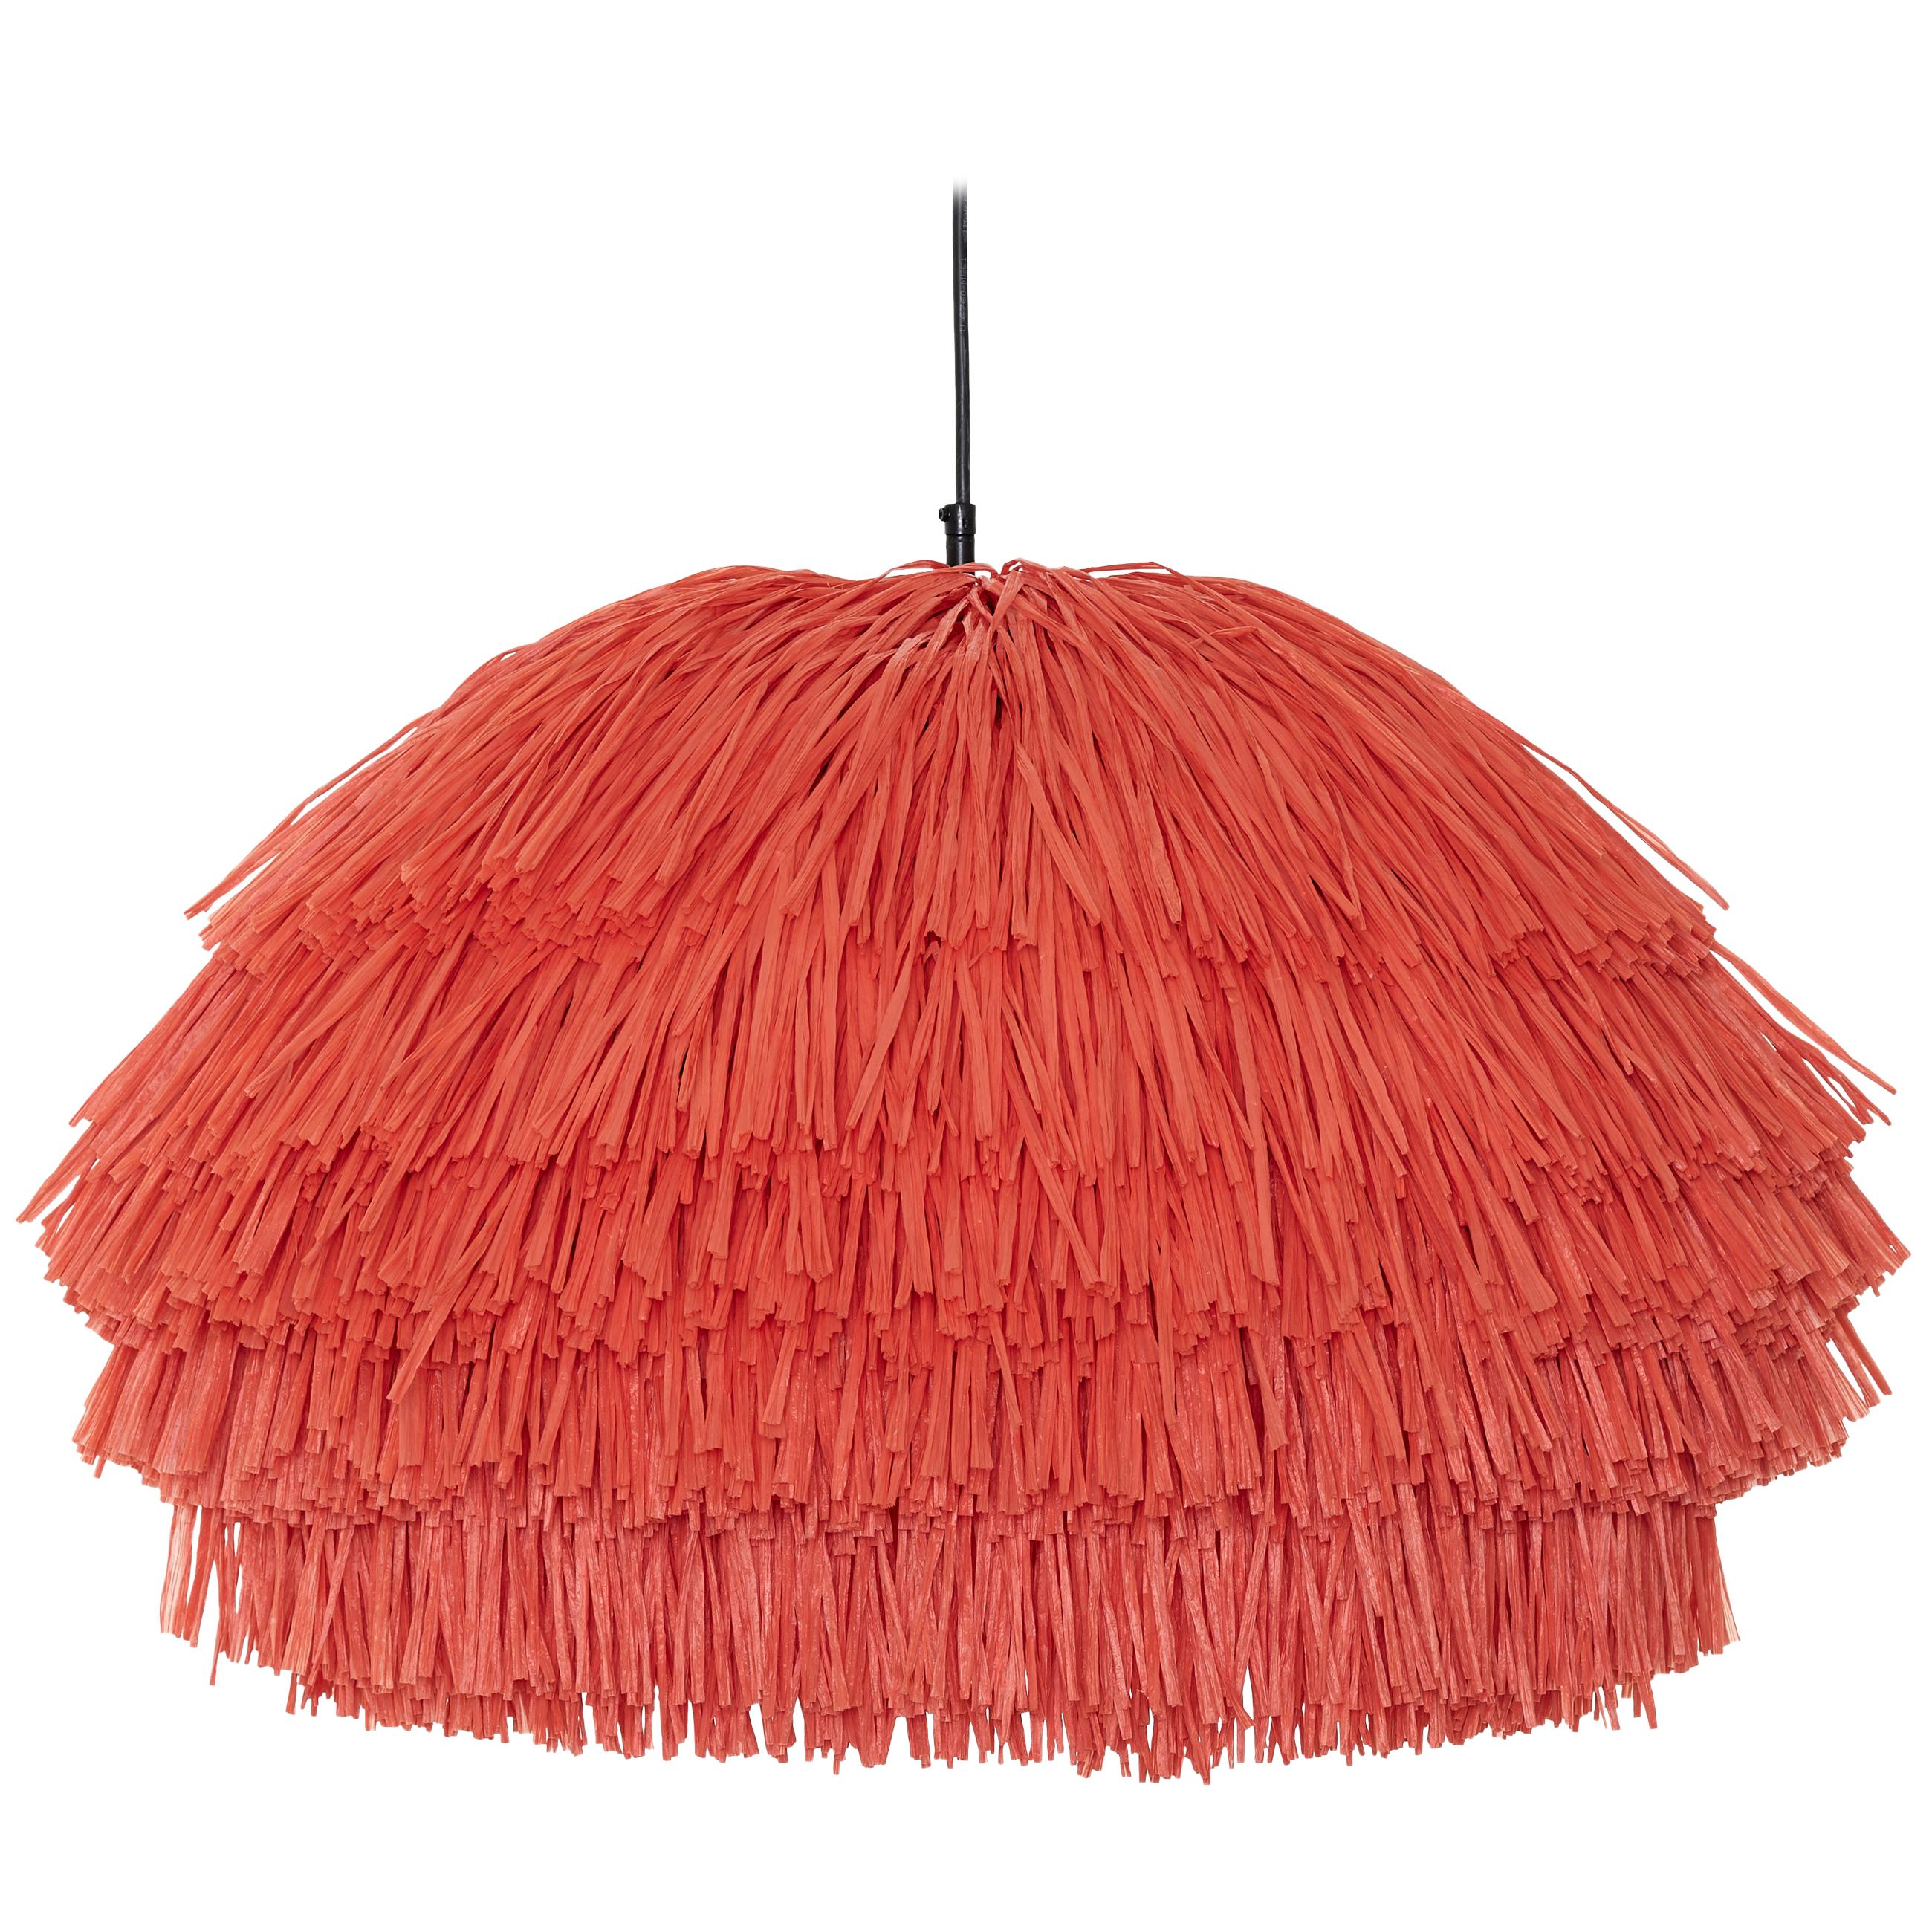 Fran CS Contemporary Floor Light in Raffia, Copper and Steel by Llot Llov  For Sale at 1stDibs